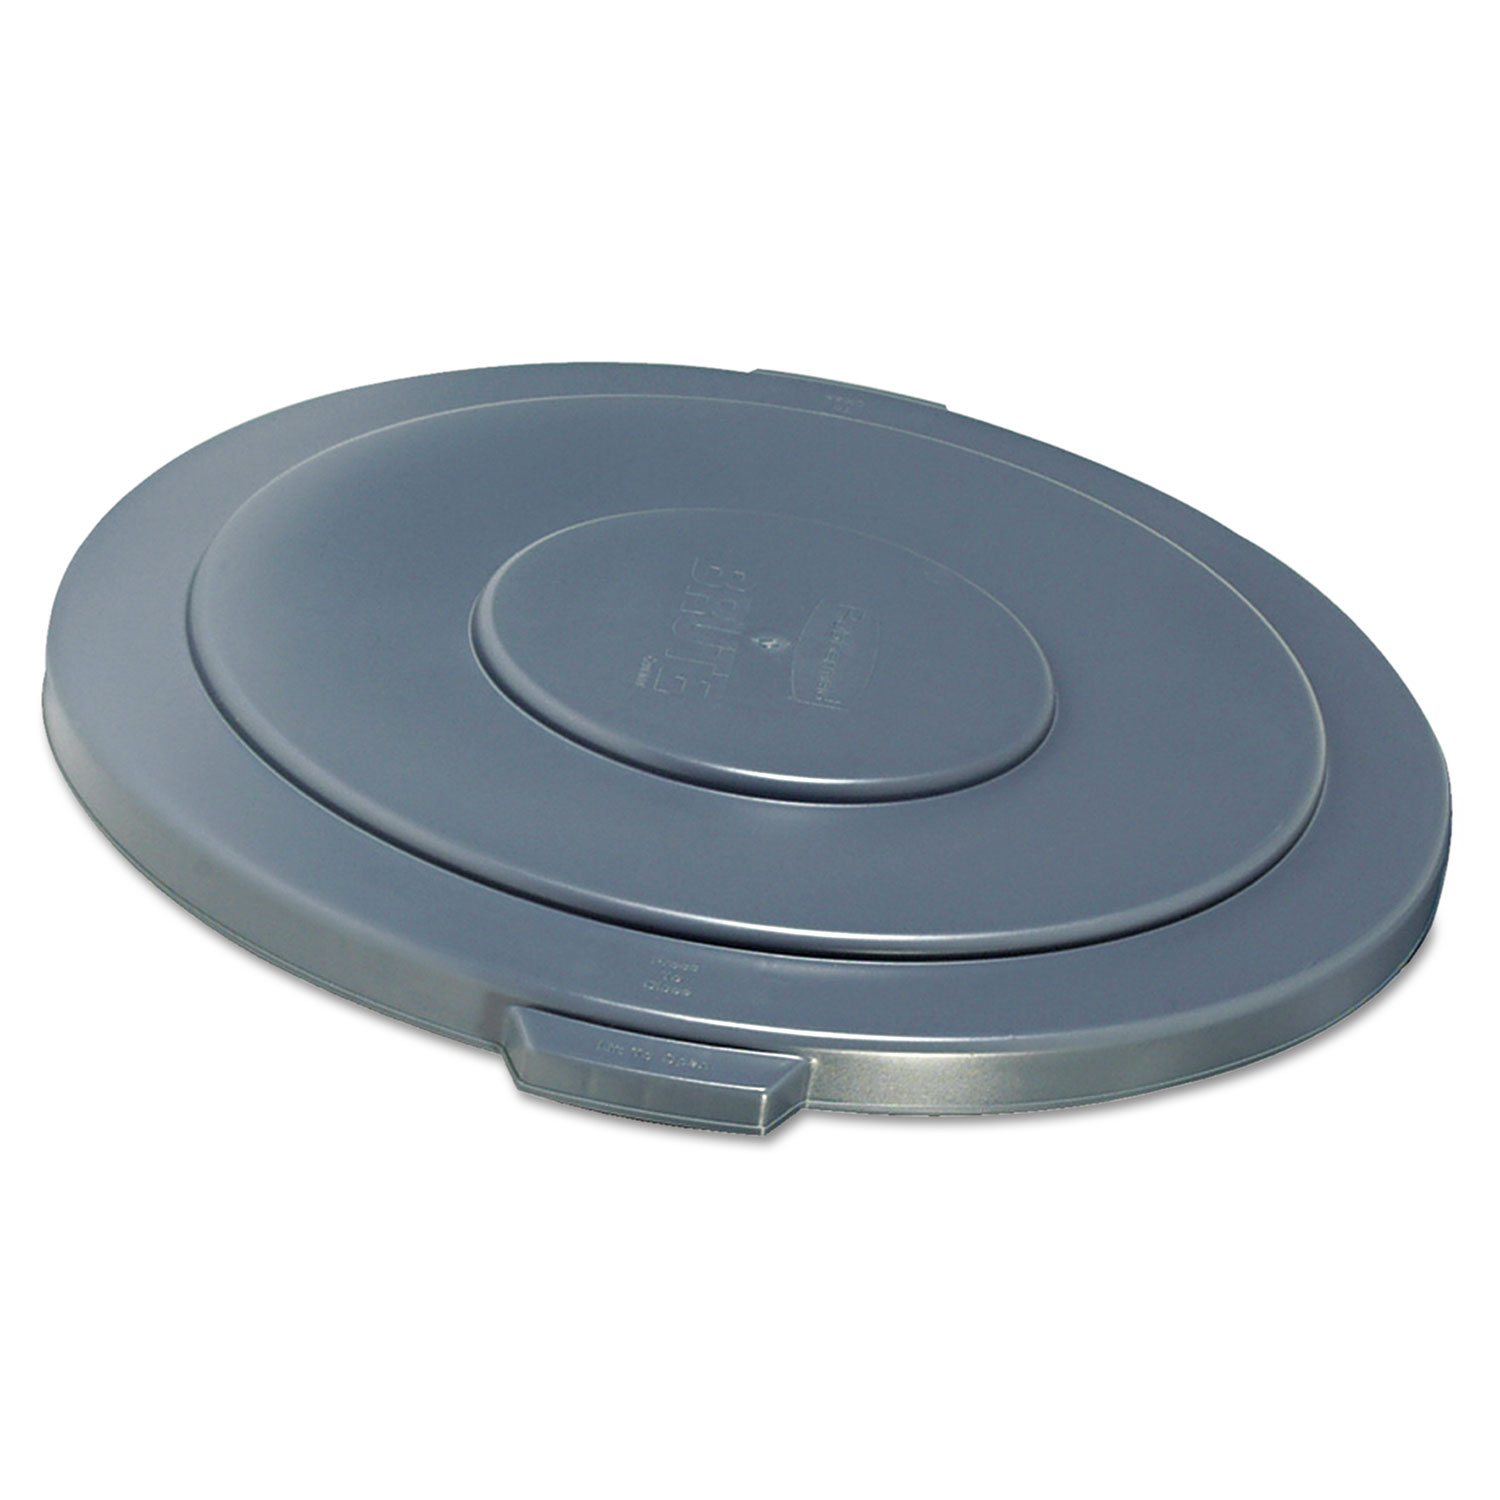  Rubbermaid Commercial FG265400GRAY Round Flat Top Lid, for 55 gal Round BRUTE Containers, 26.75 diameter, Gray (RCP2654G) 